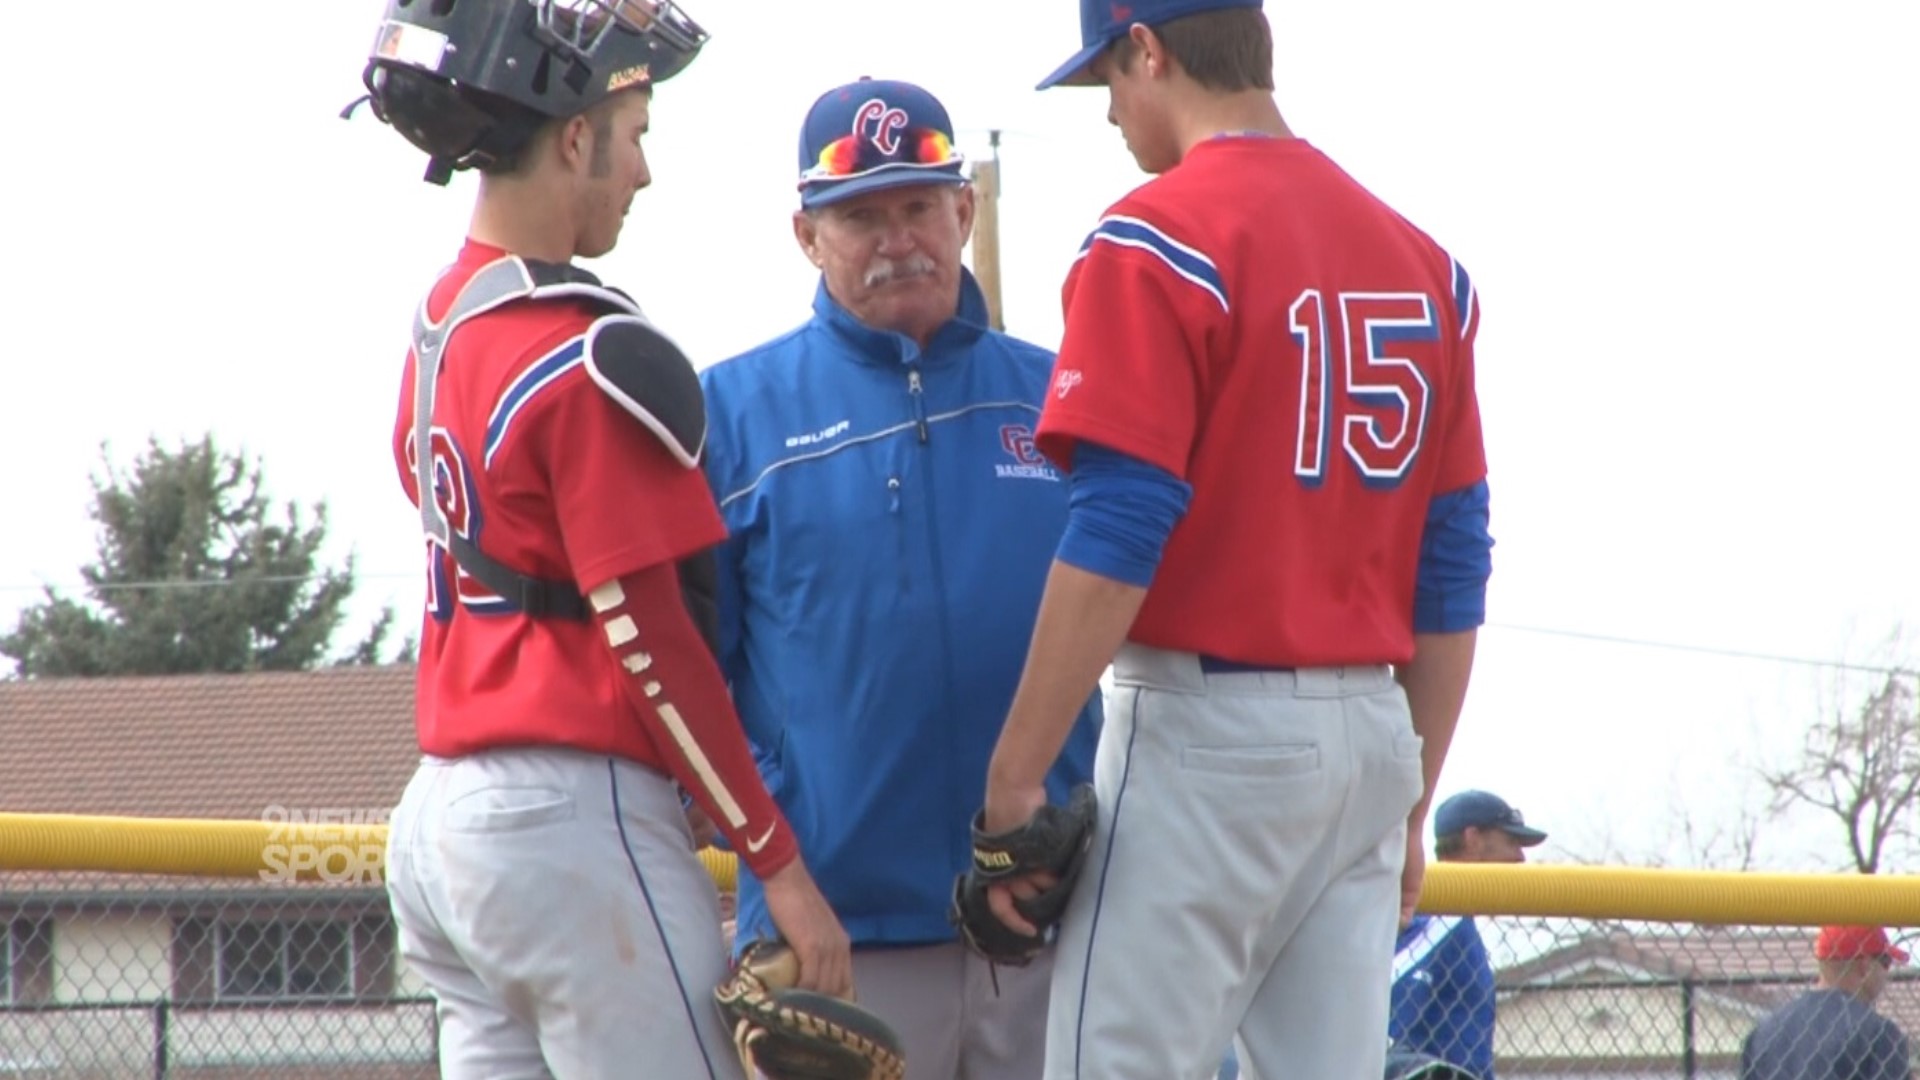 The high school baseball icon is retiring after his 52nd season as the Bruins' head coach.